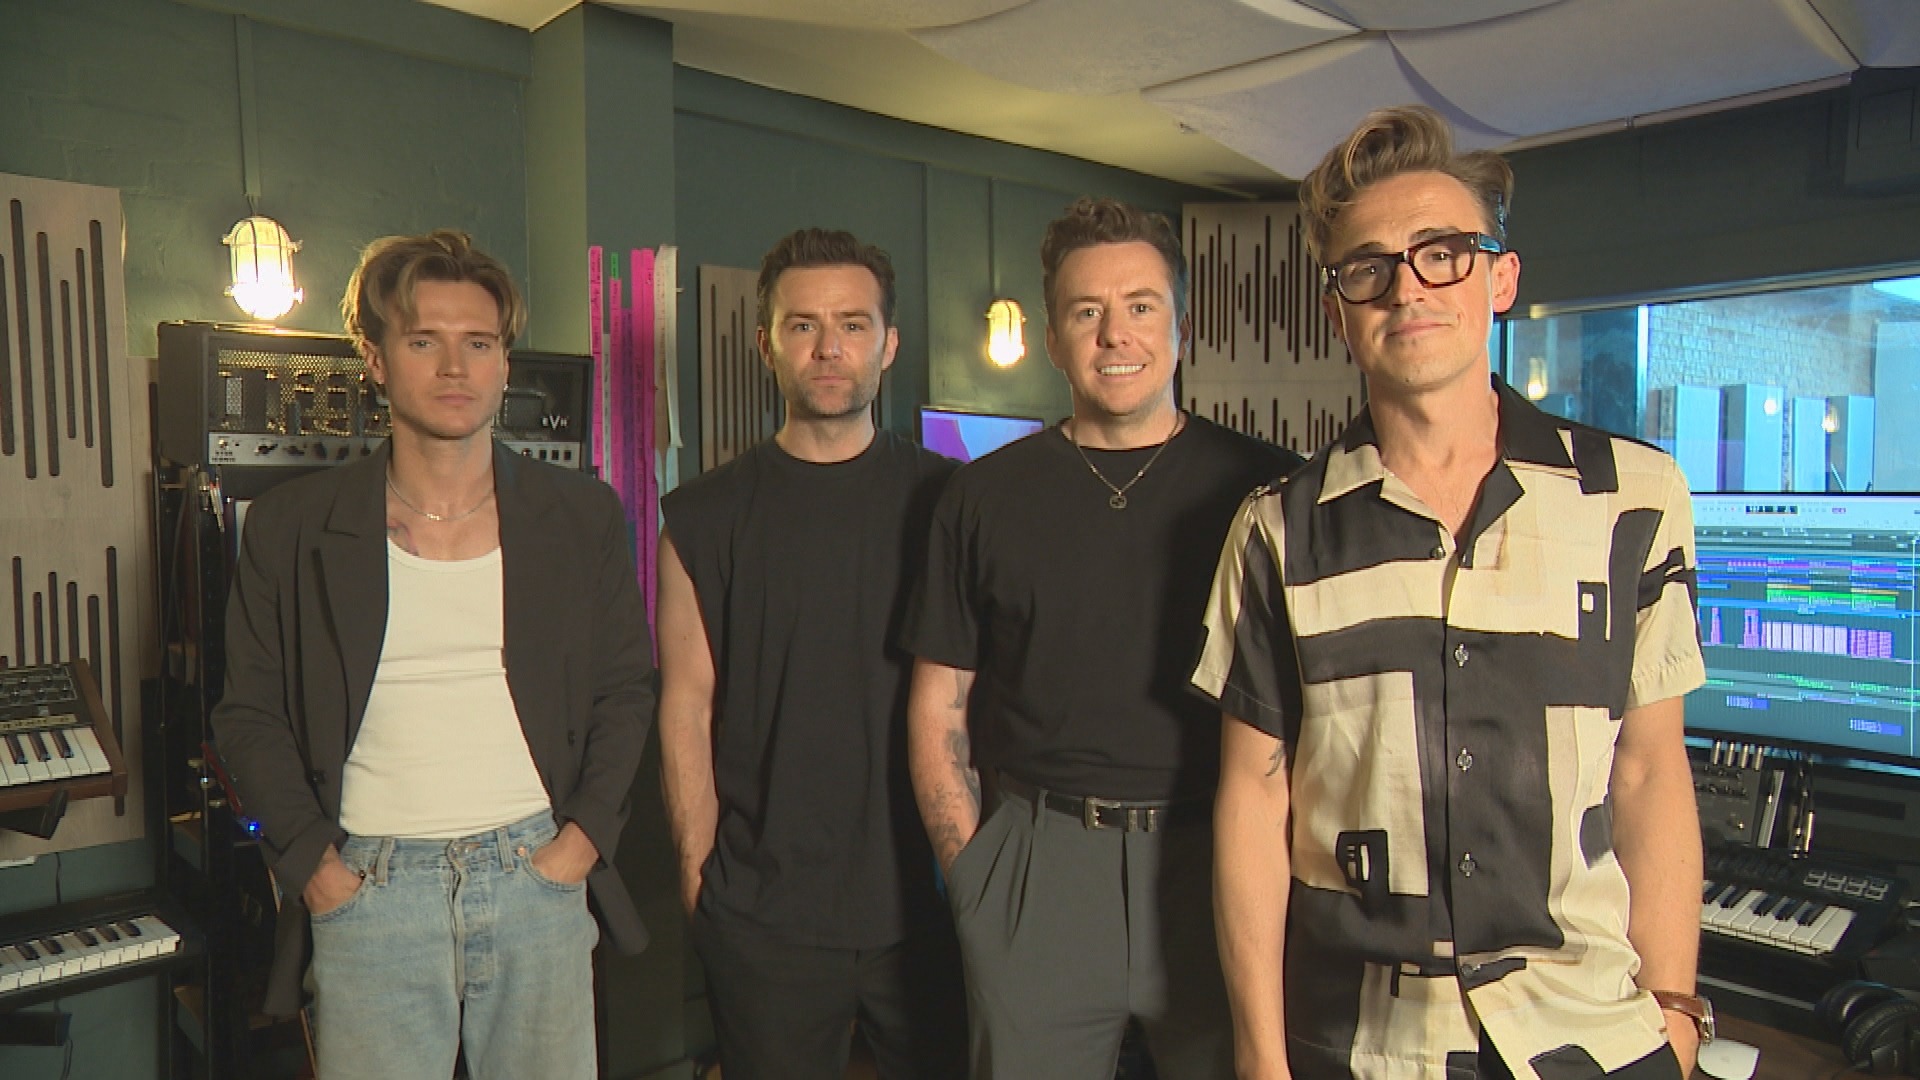 Watch McFly's LIVE session - featuring songs from their brand new